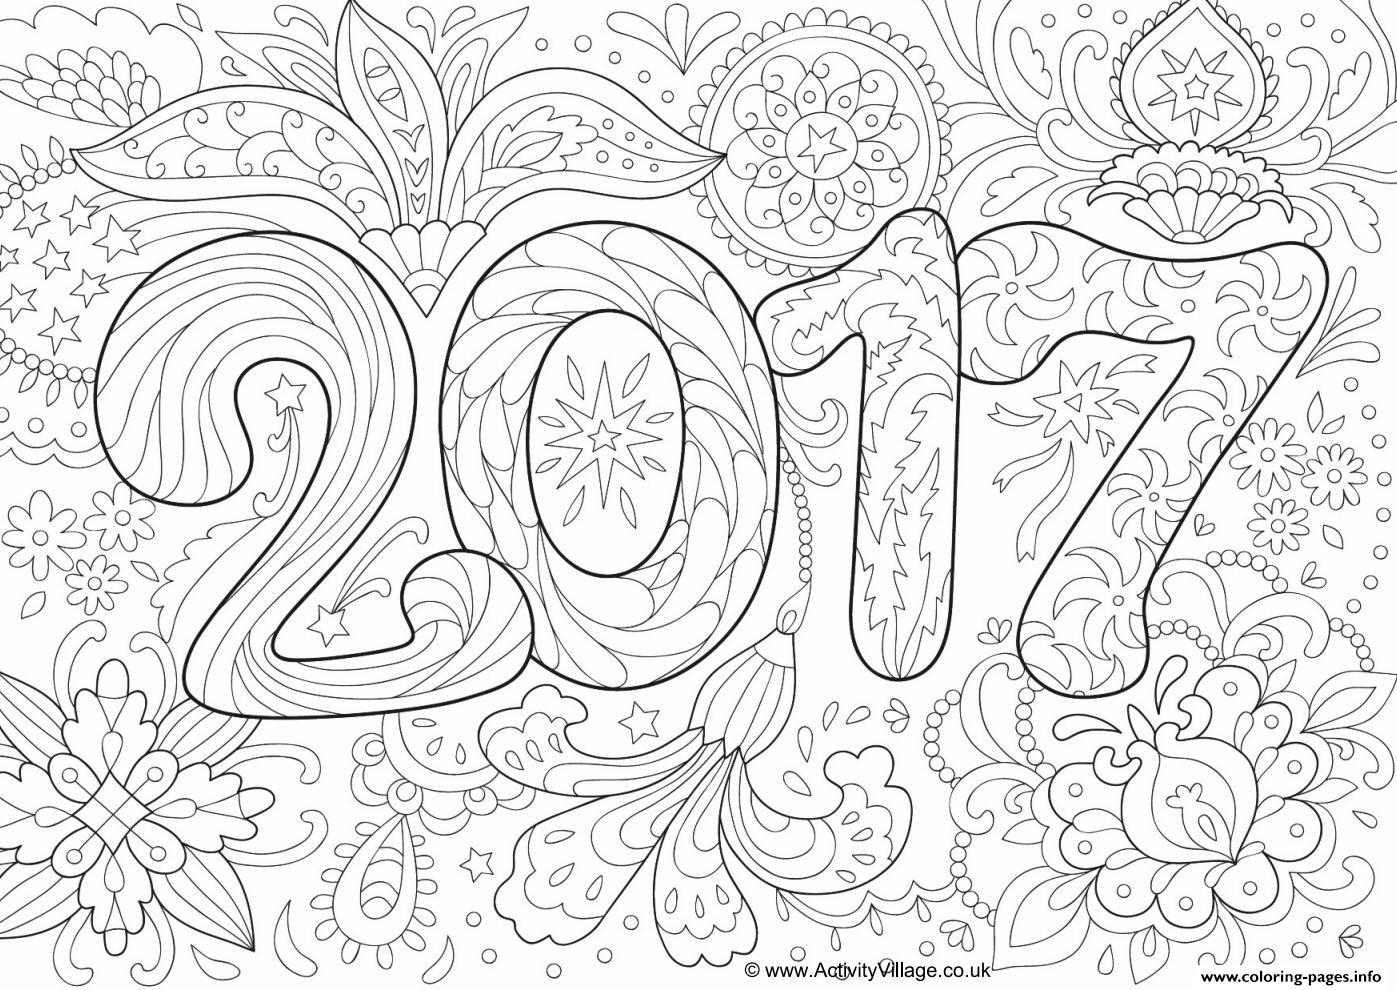 Doodle Adult New Year 2017 coloring